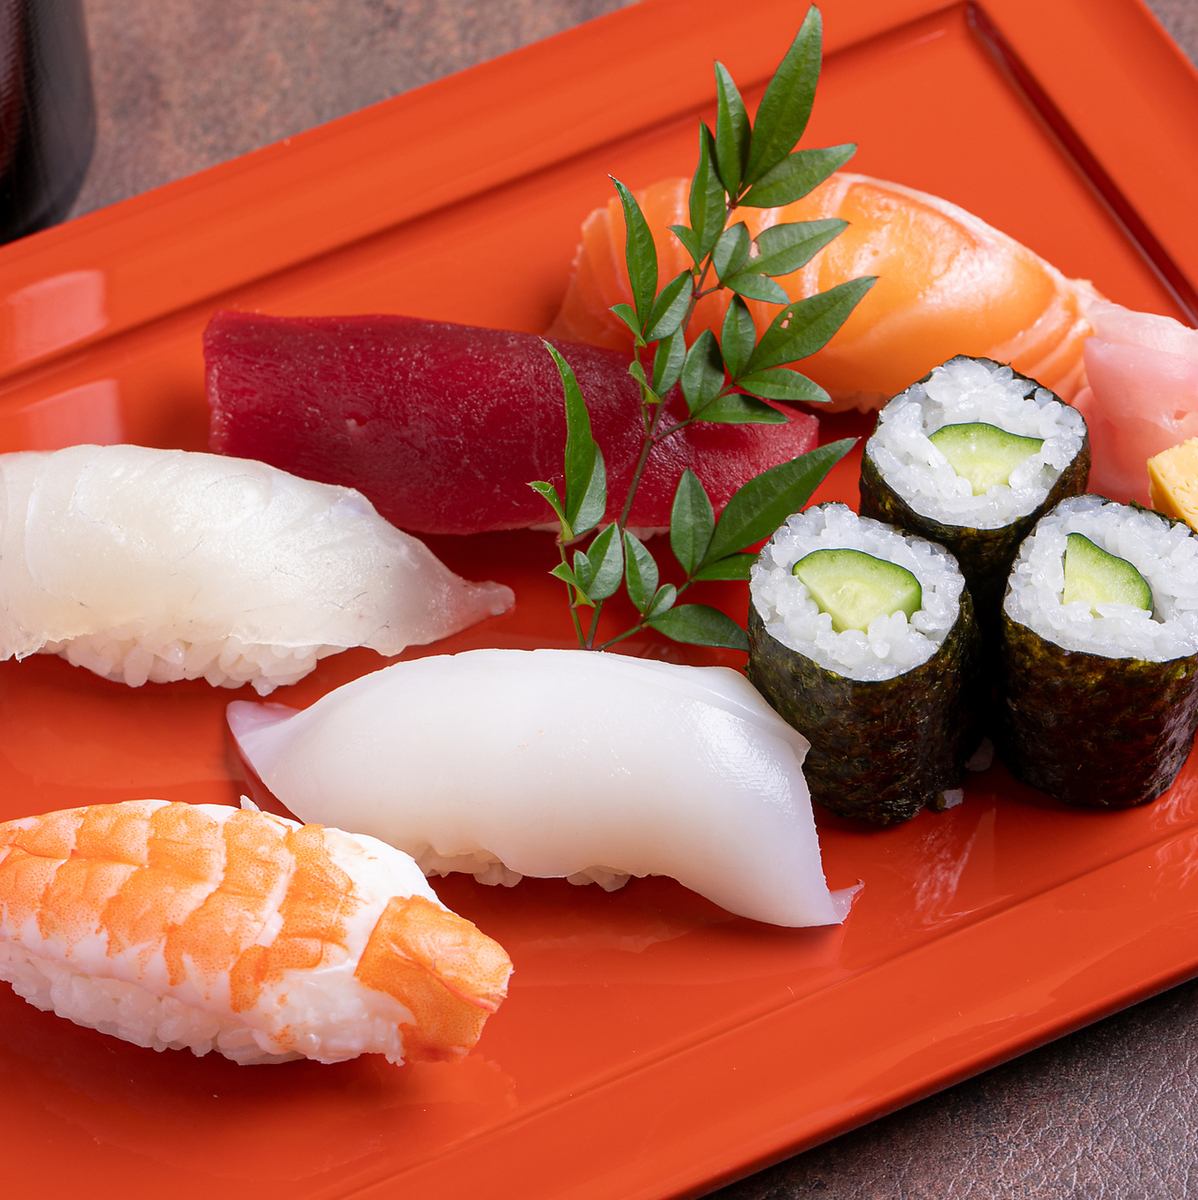 Abeno Harukas 13th floor ♪ Seasonal menu and sushi banquet dishes are also available!